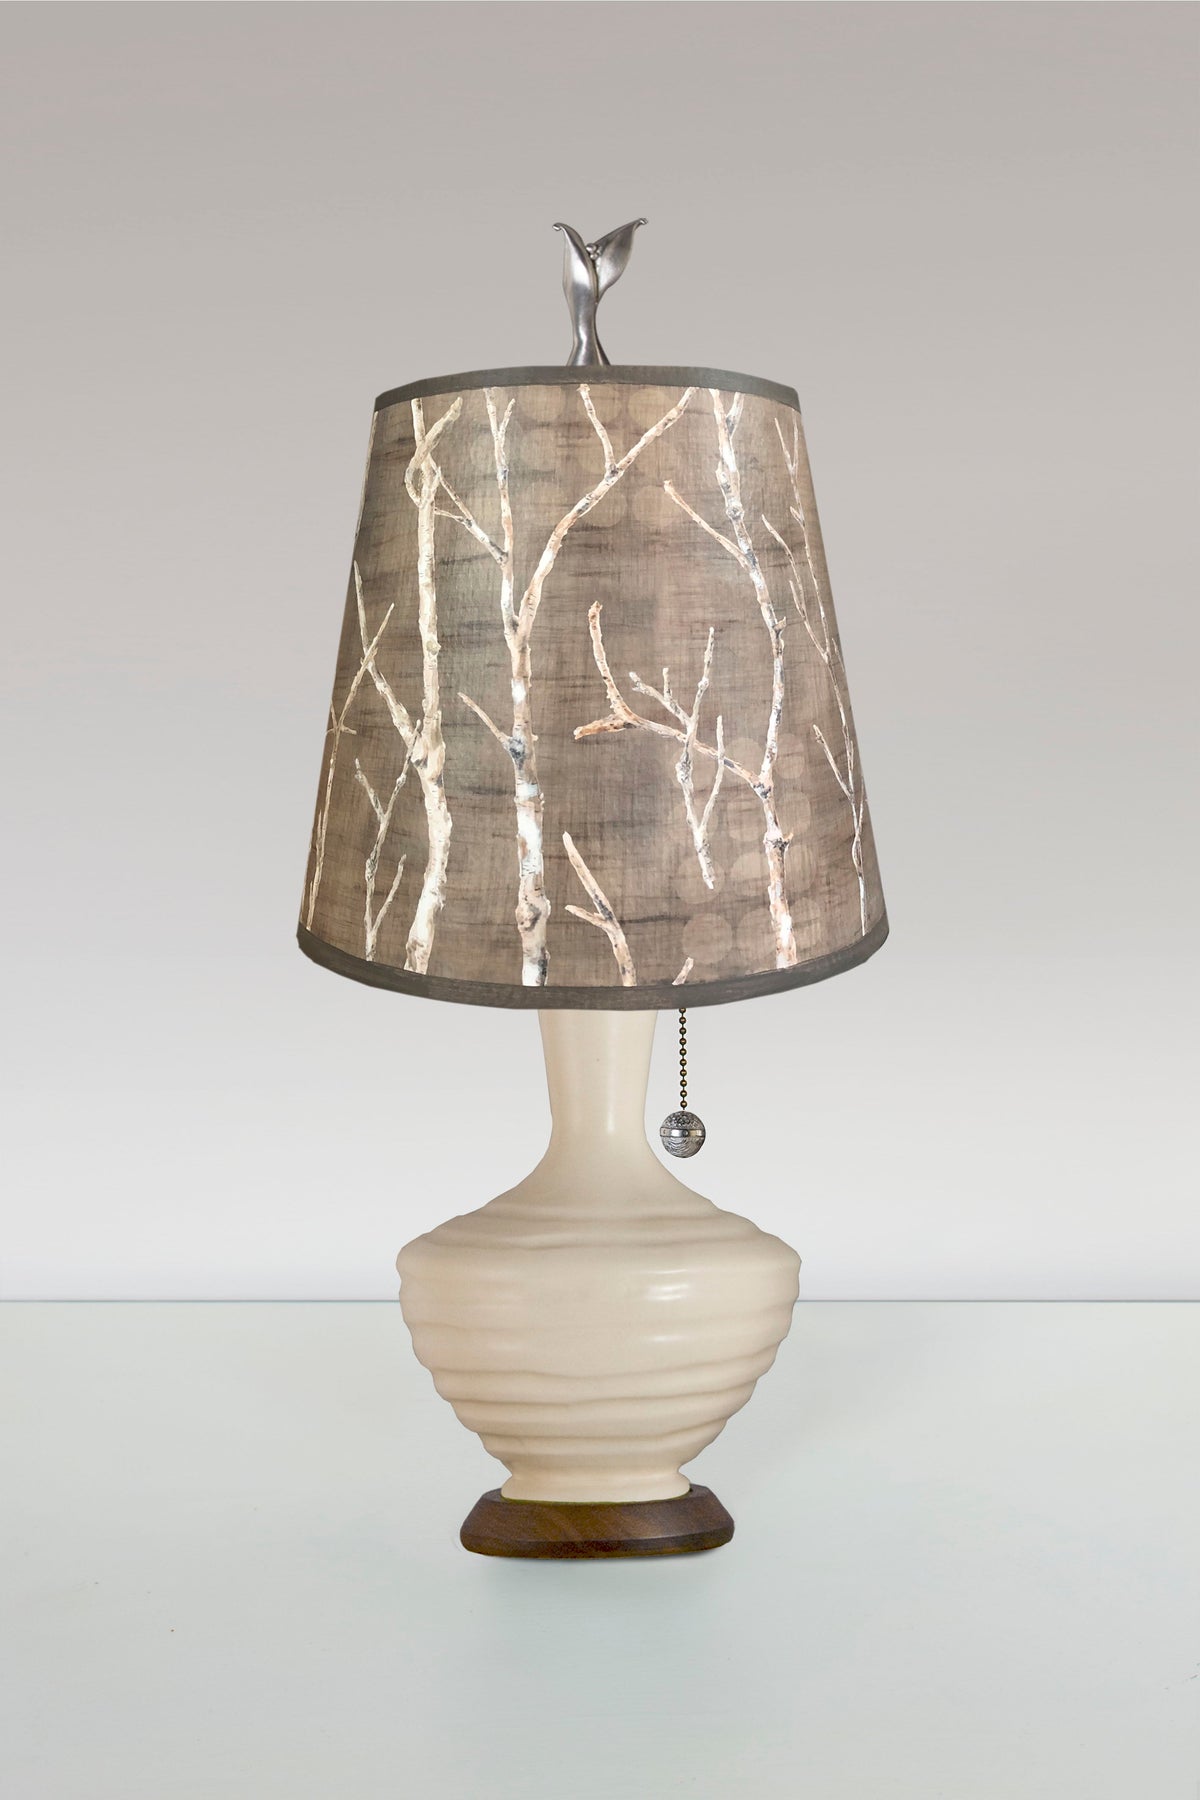 Janna Ugone &amp; Co Table Lamps Ceramic Table Lamp in Ivory Glaze with Small Drum Shade in Twigs